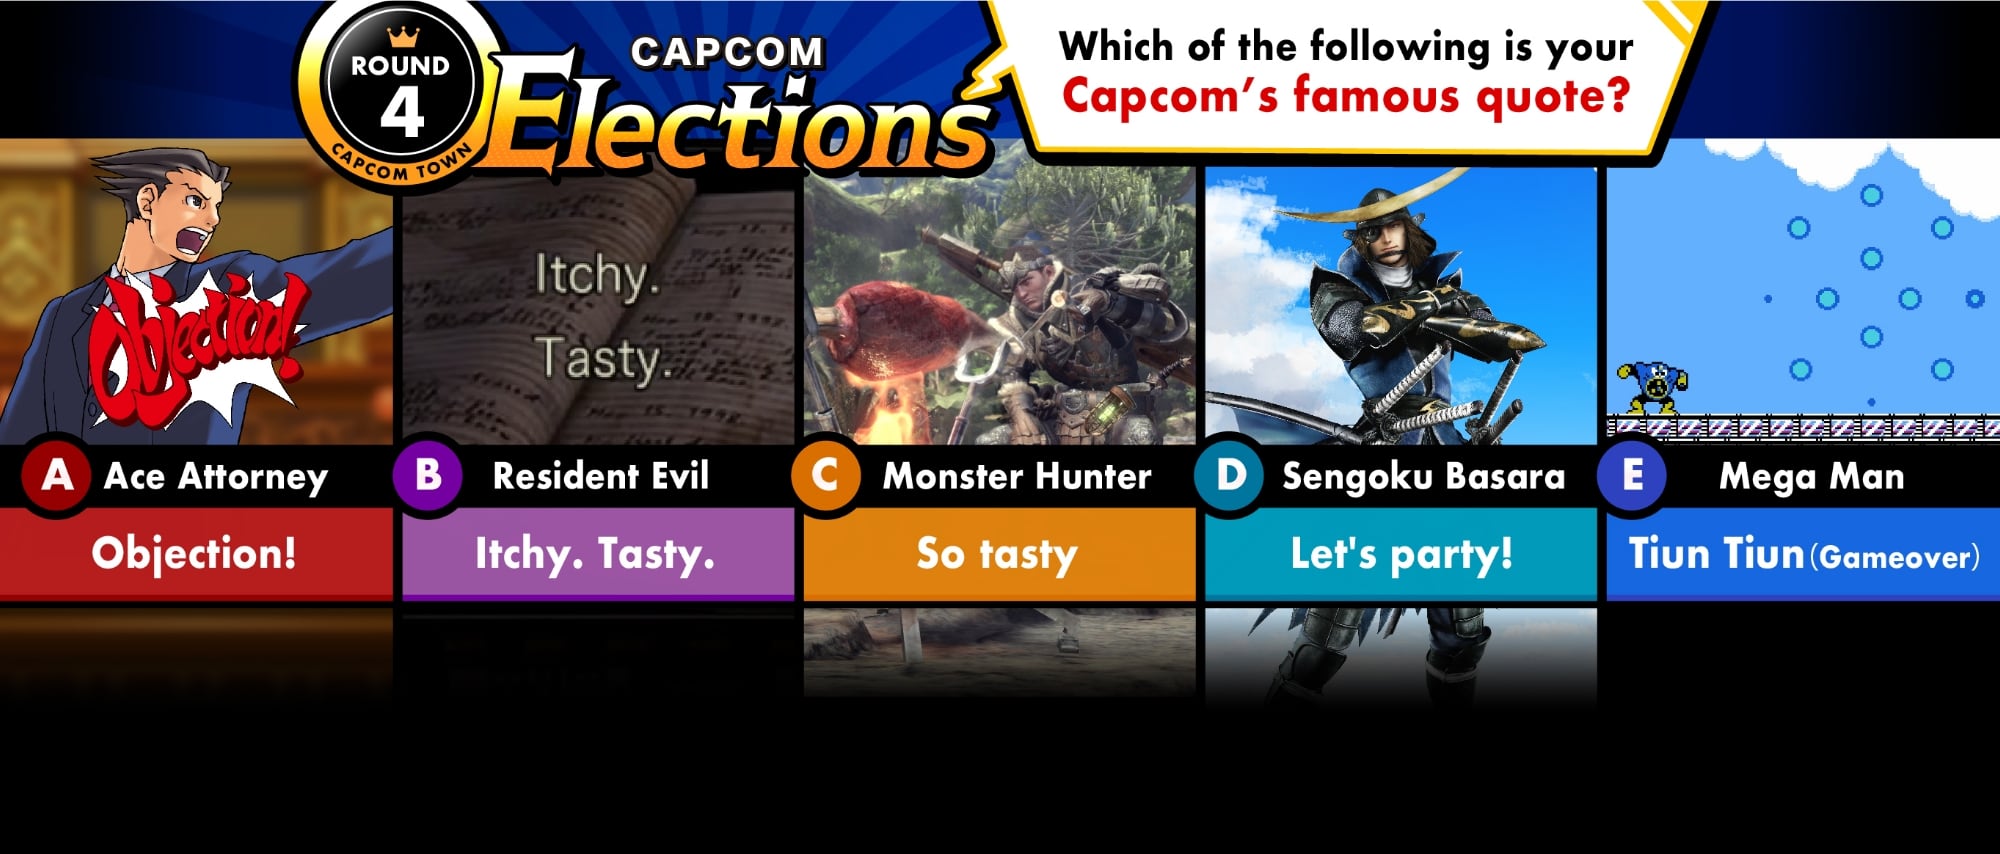 Capcom Elections Round 4: Which of the following is your Capcom’s famous quote?